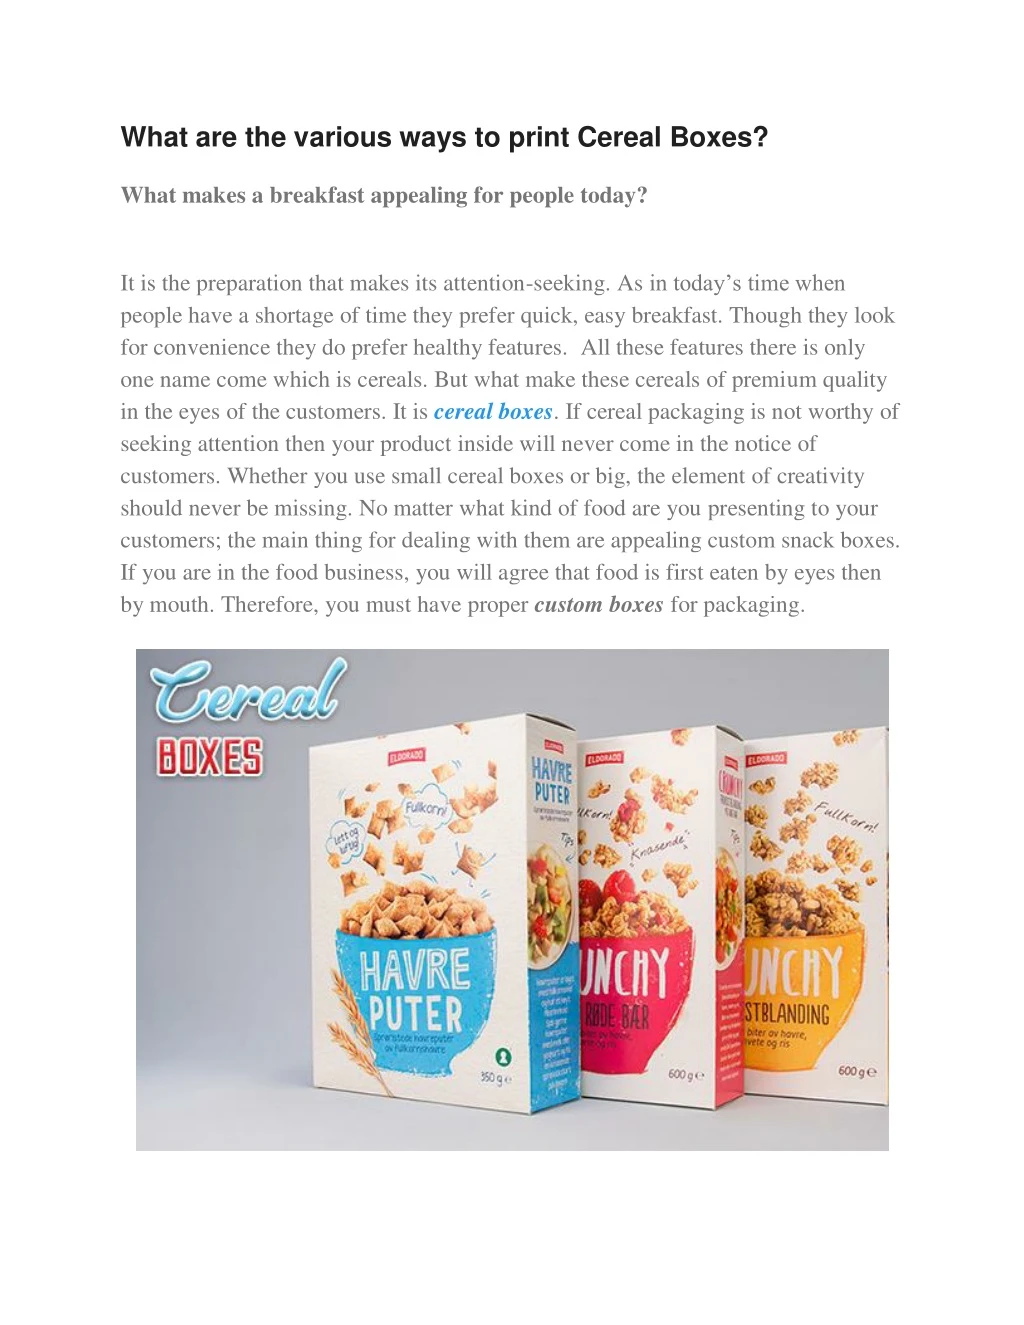 what are the various ways to print cereal boxes